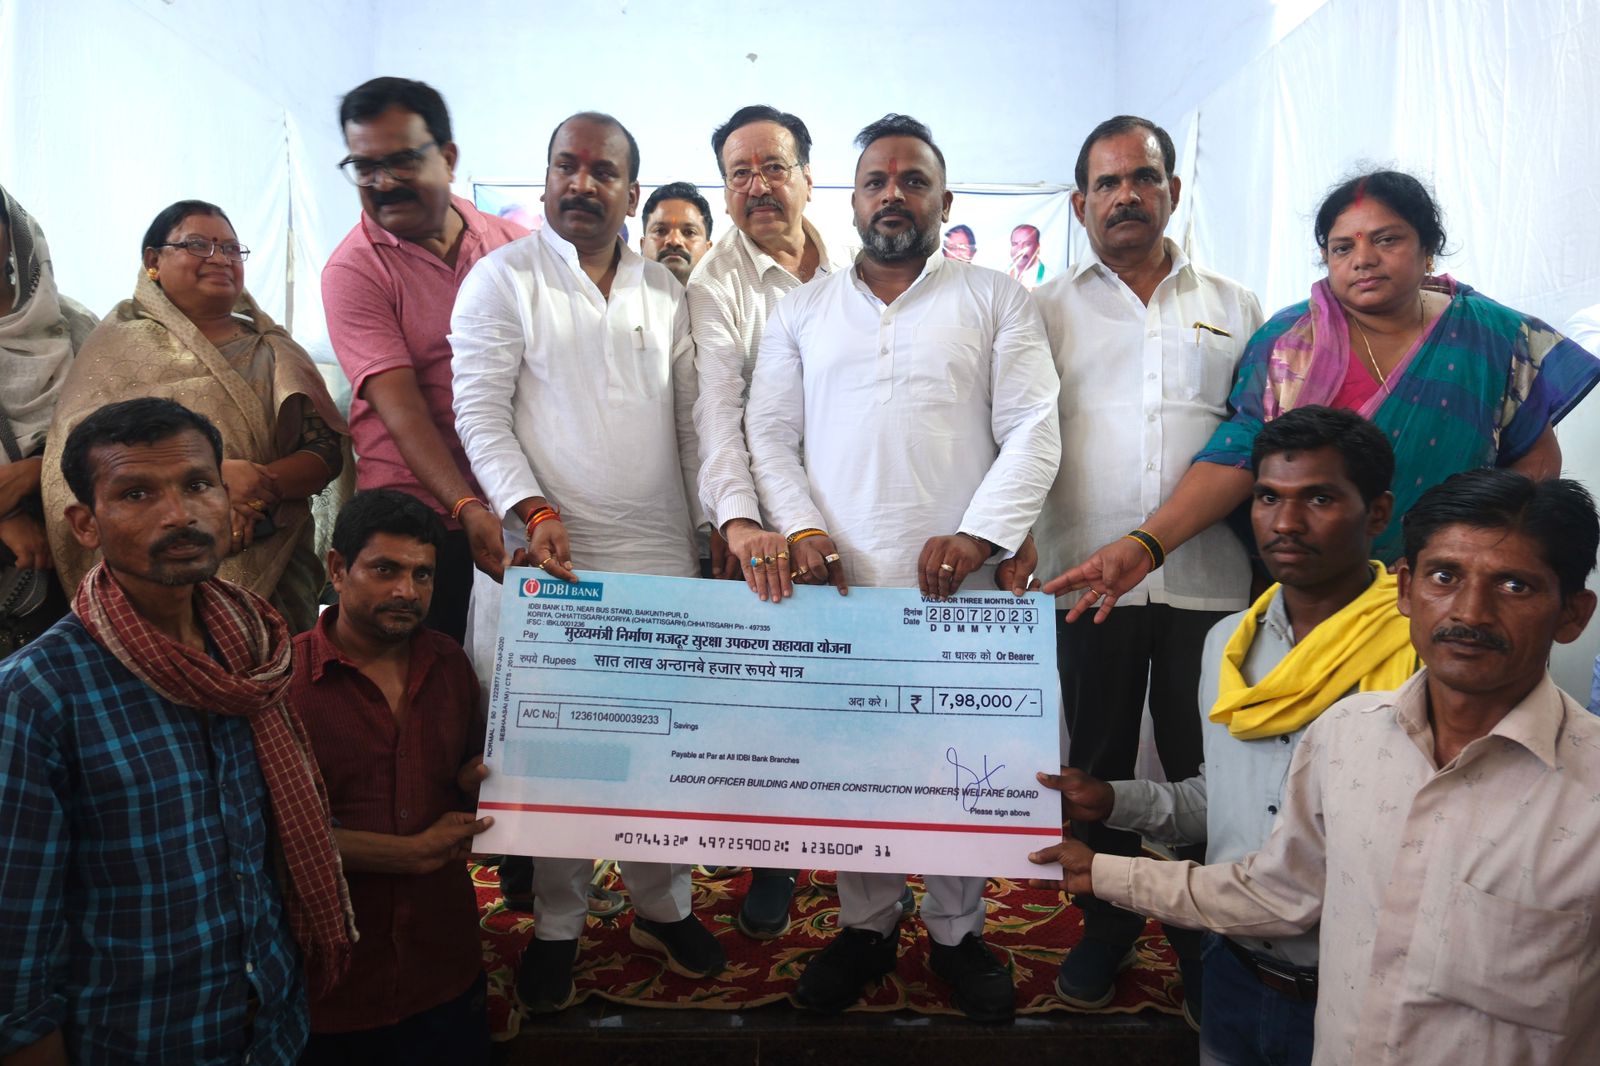 Sushil Sunny Aggarwal distributed checks worth Rs.89,64,000 to beneficiaries in Korea under various schemes, labor conference organized by Labor Department in Korea, Baikunthpur, Manas Bhawan, Chhattisgarh Building and Other Construction Workers Welfare Board, Chhattisgarh, Khabargali